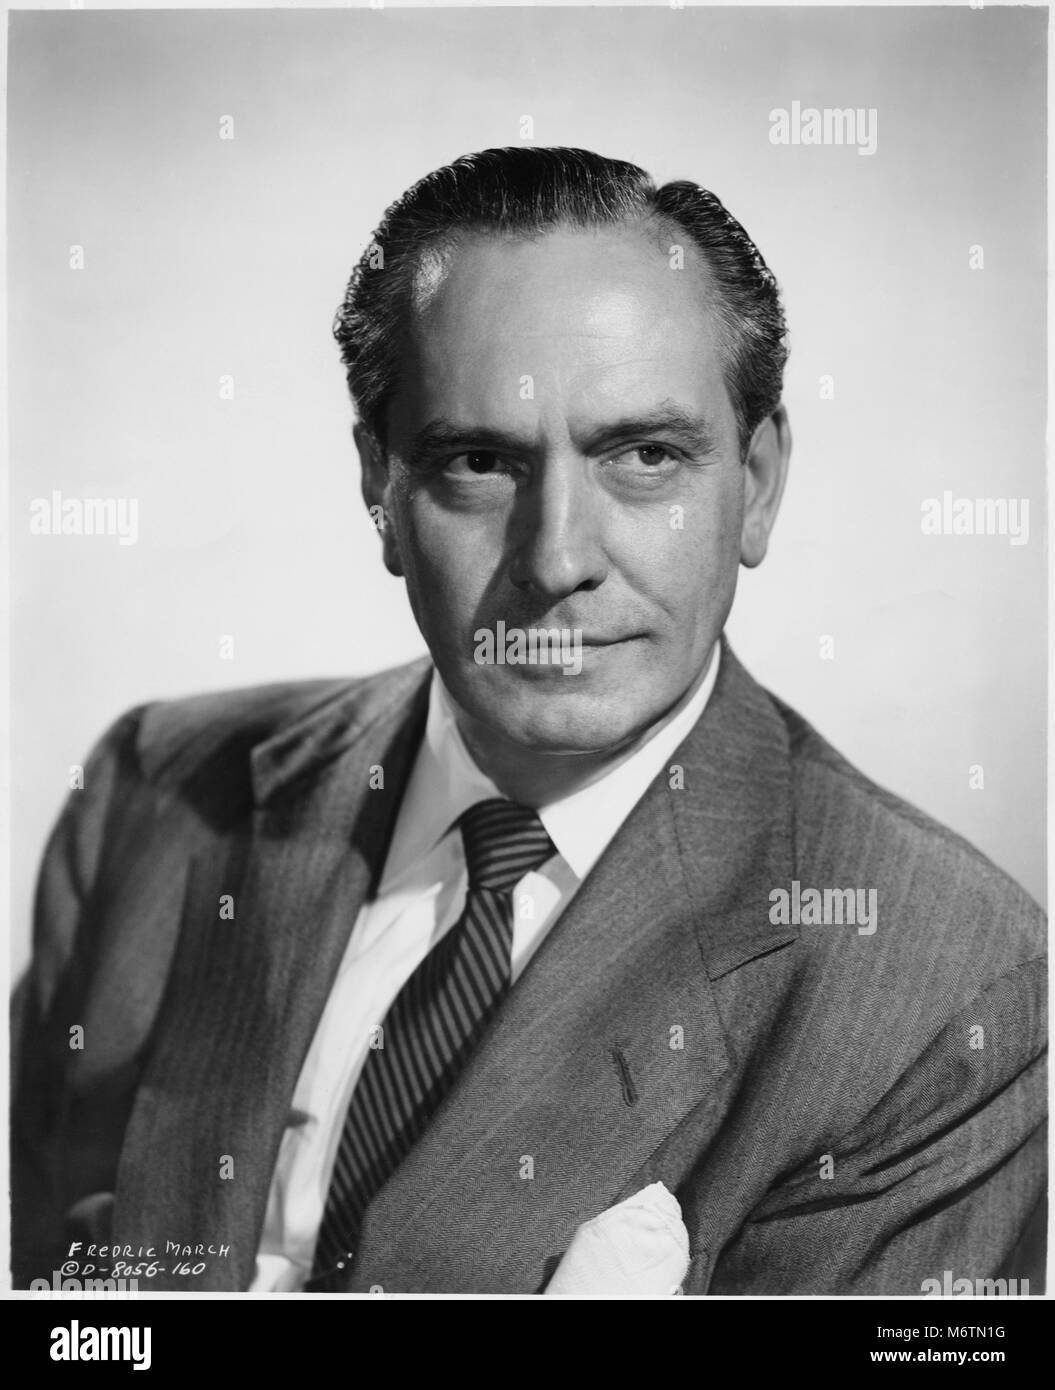 Fredric March, Publicity Portrait for the Film, 'Death of a Salesman', Columbia Pictures, 1951 Stock Photo